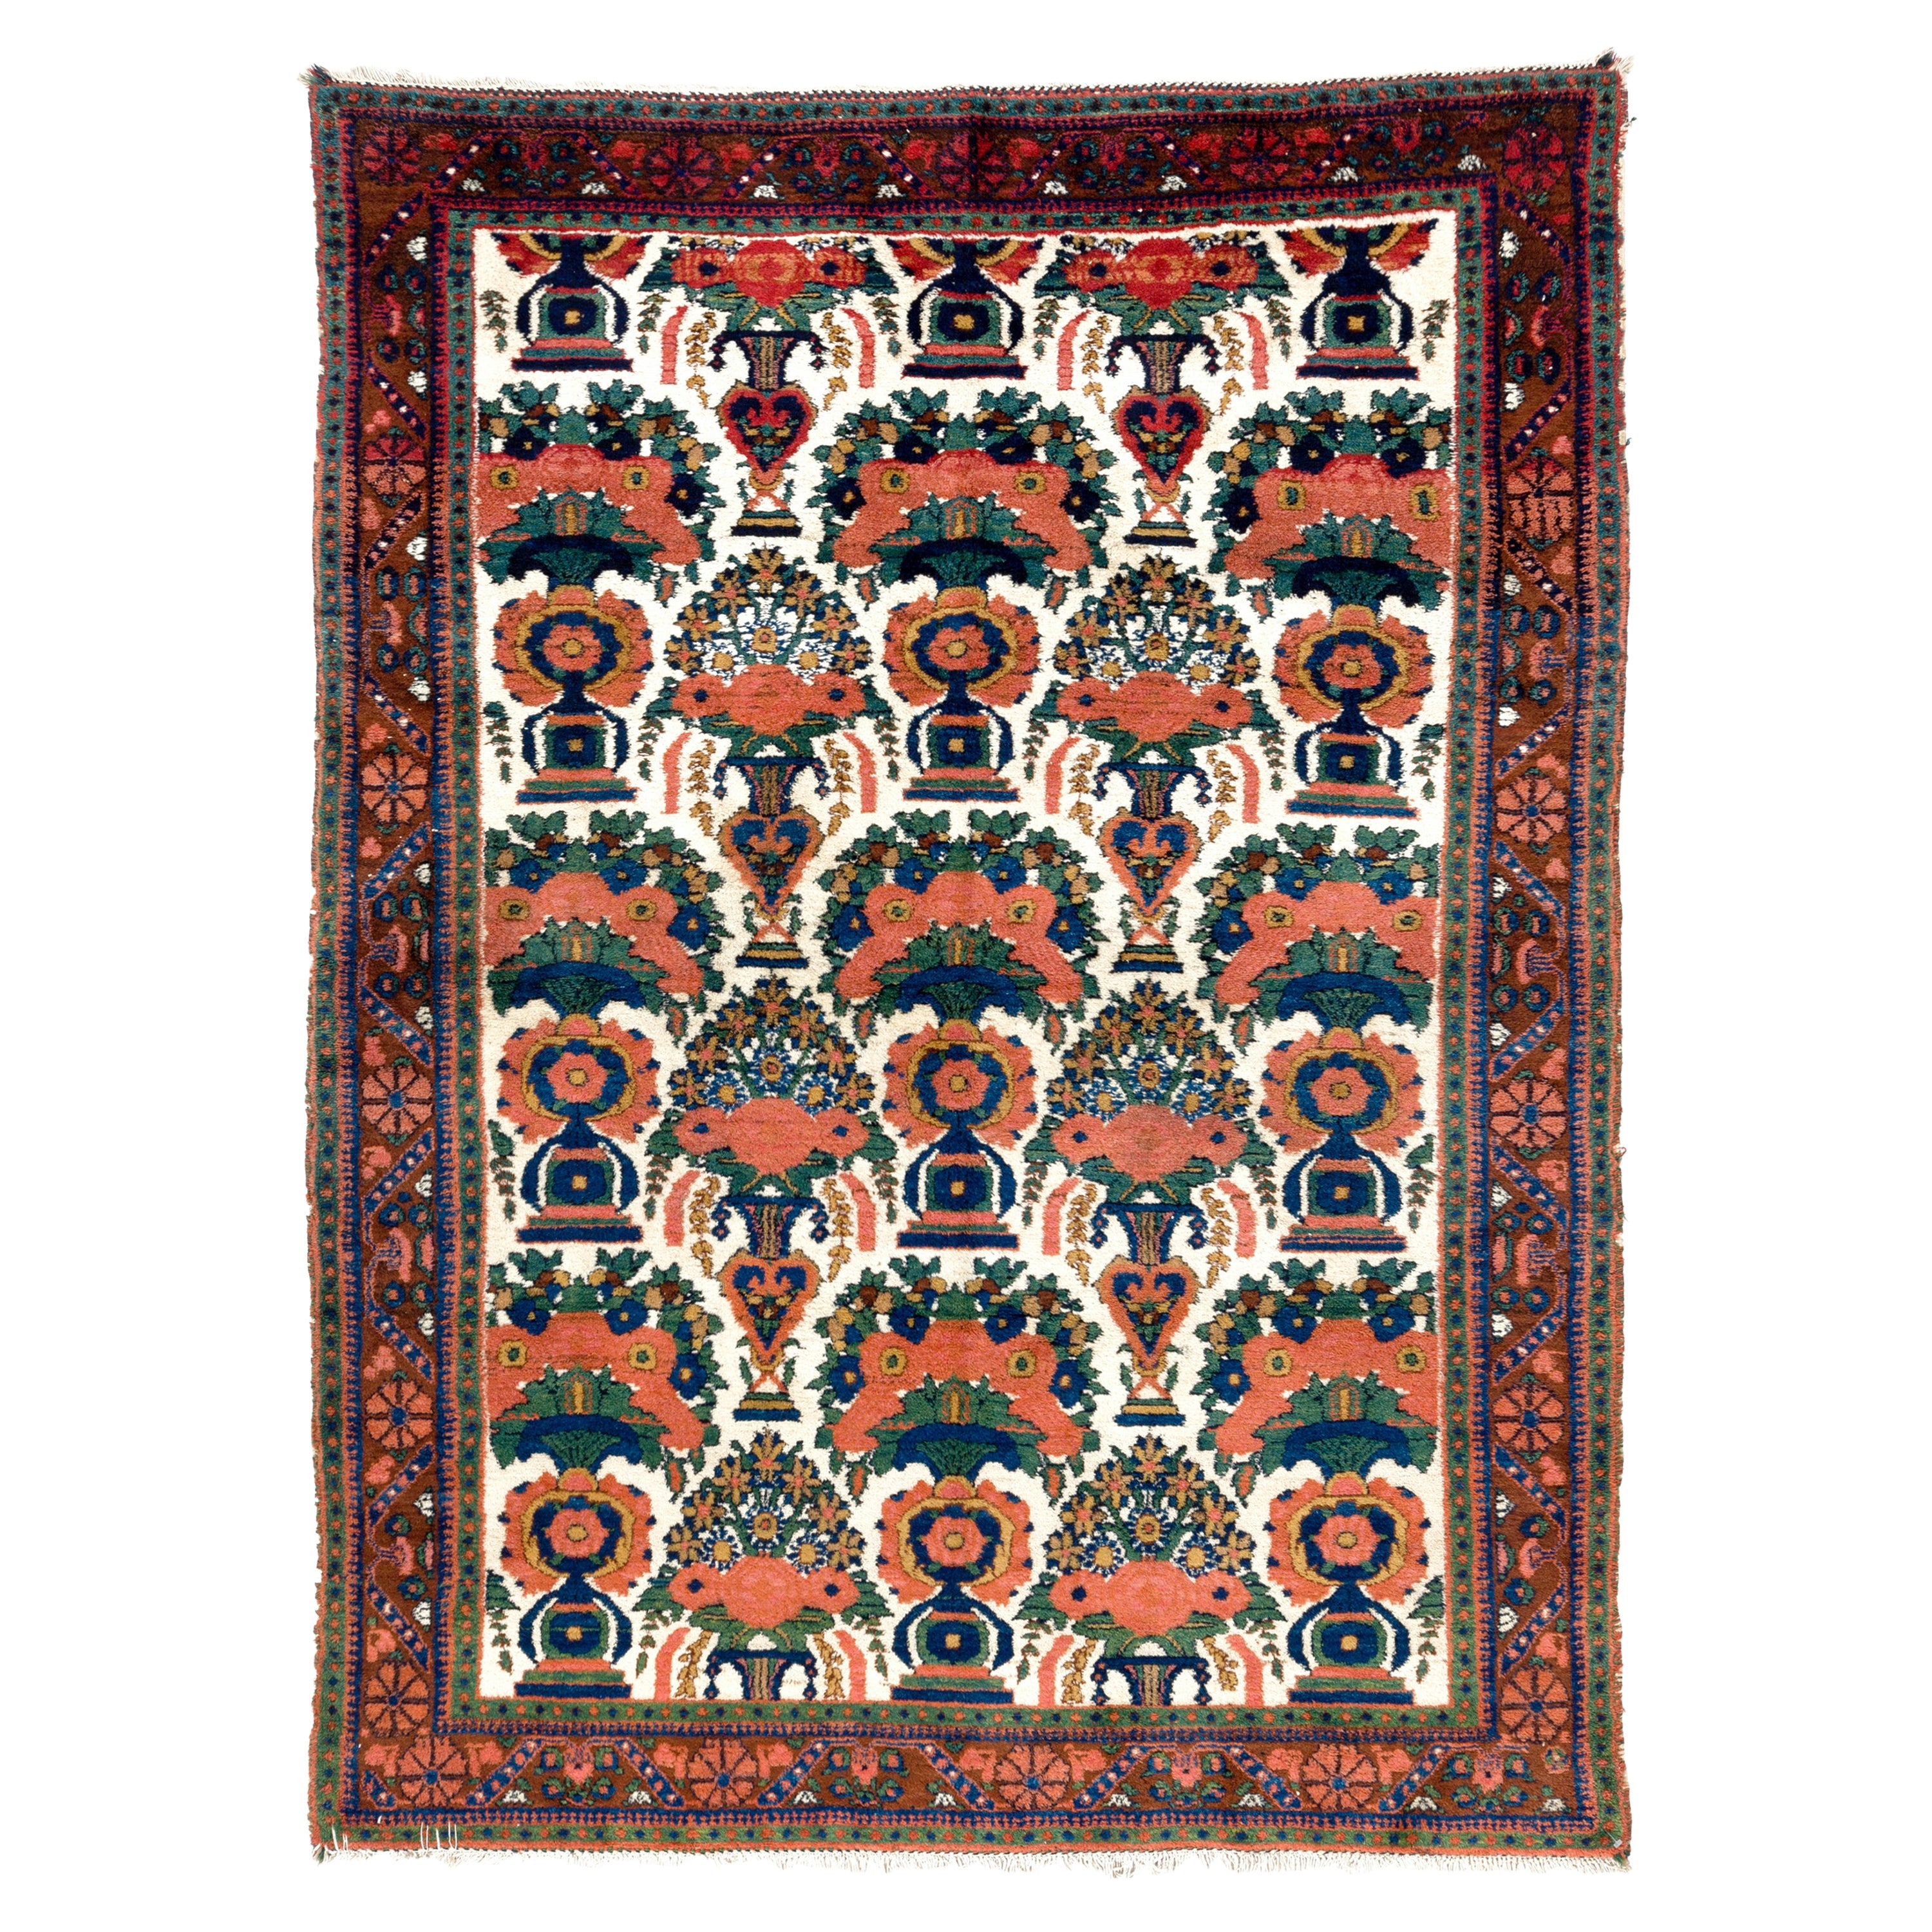 Antique Persian Tribal Afshar Rug, Excellent Original Condition. 4.8 x 6.3 ft For Sale